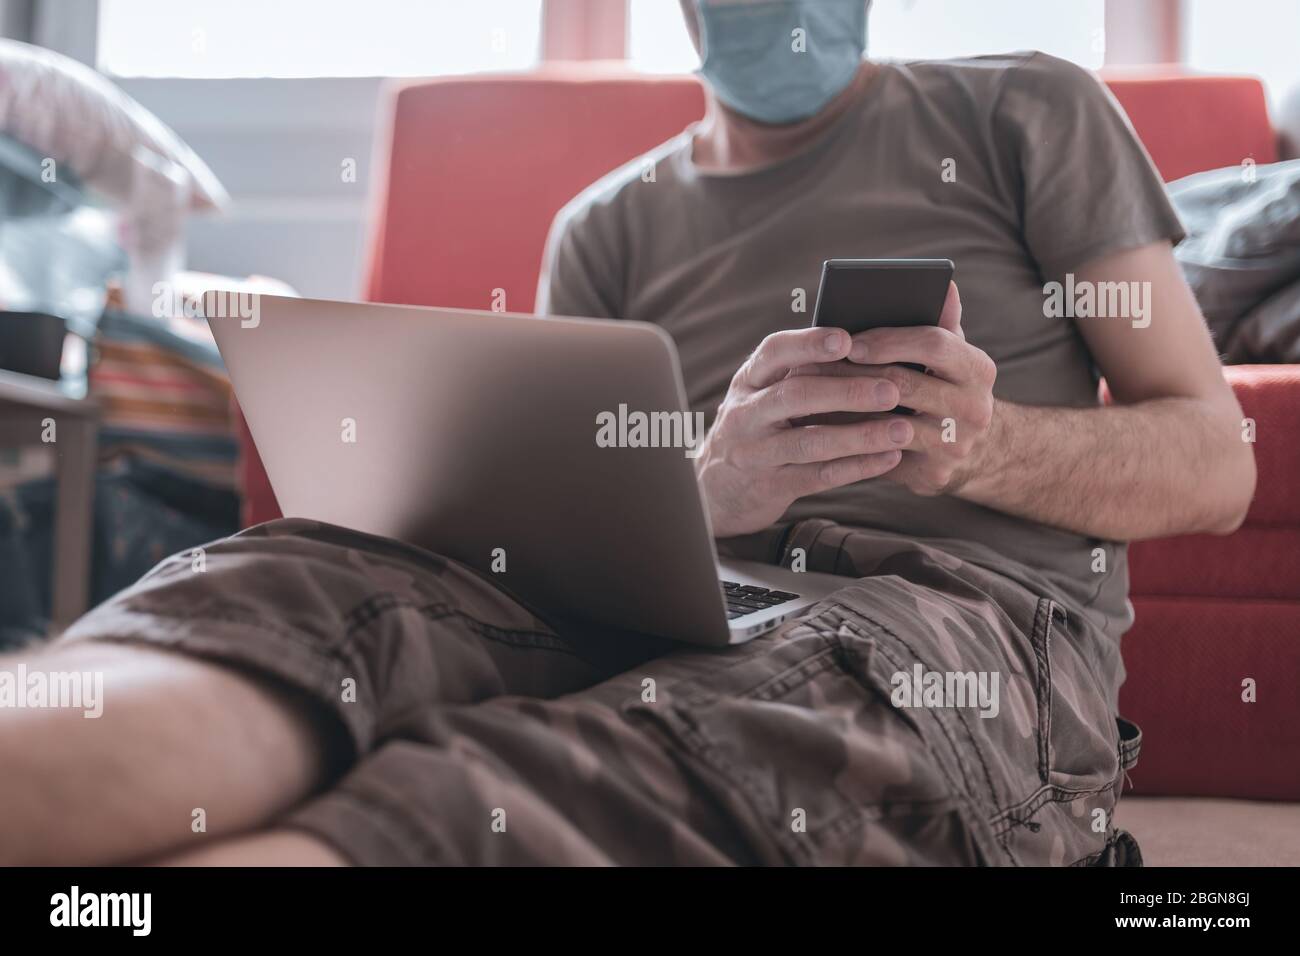 Working from home - telecommuting during covid-19 coronavirus outbreak, man using laptop and mobile phone Stock Photo